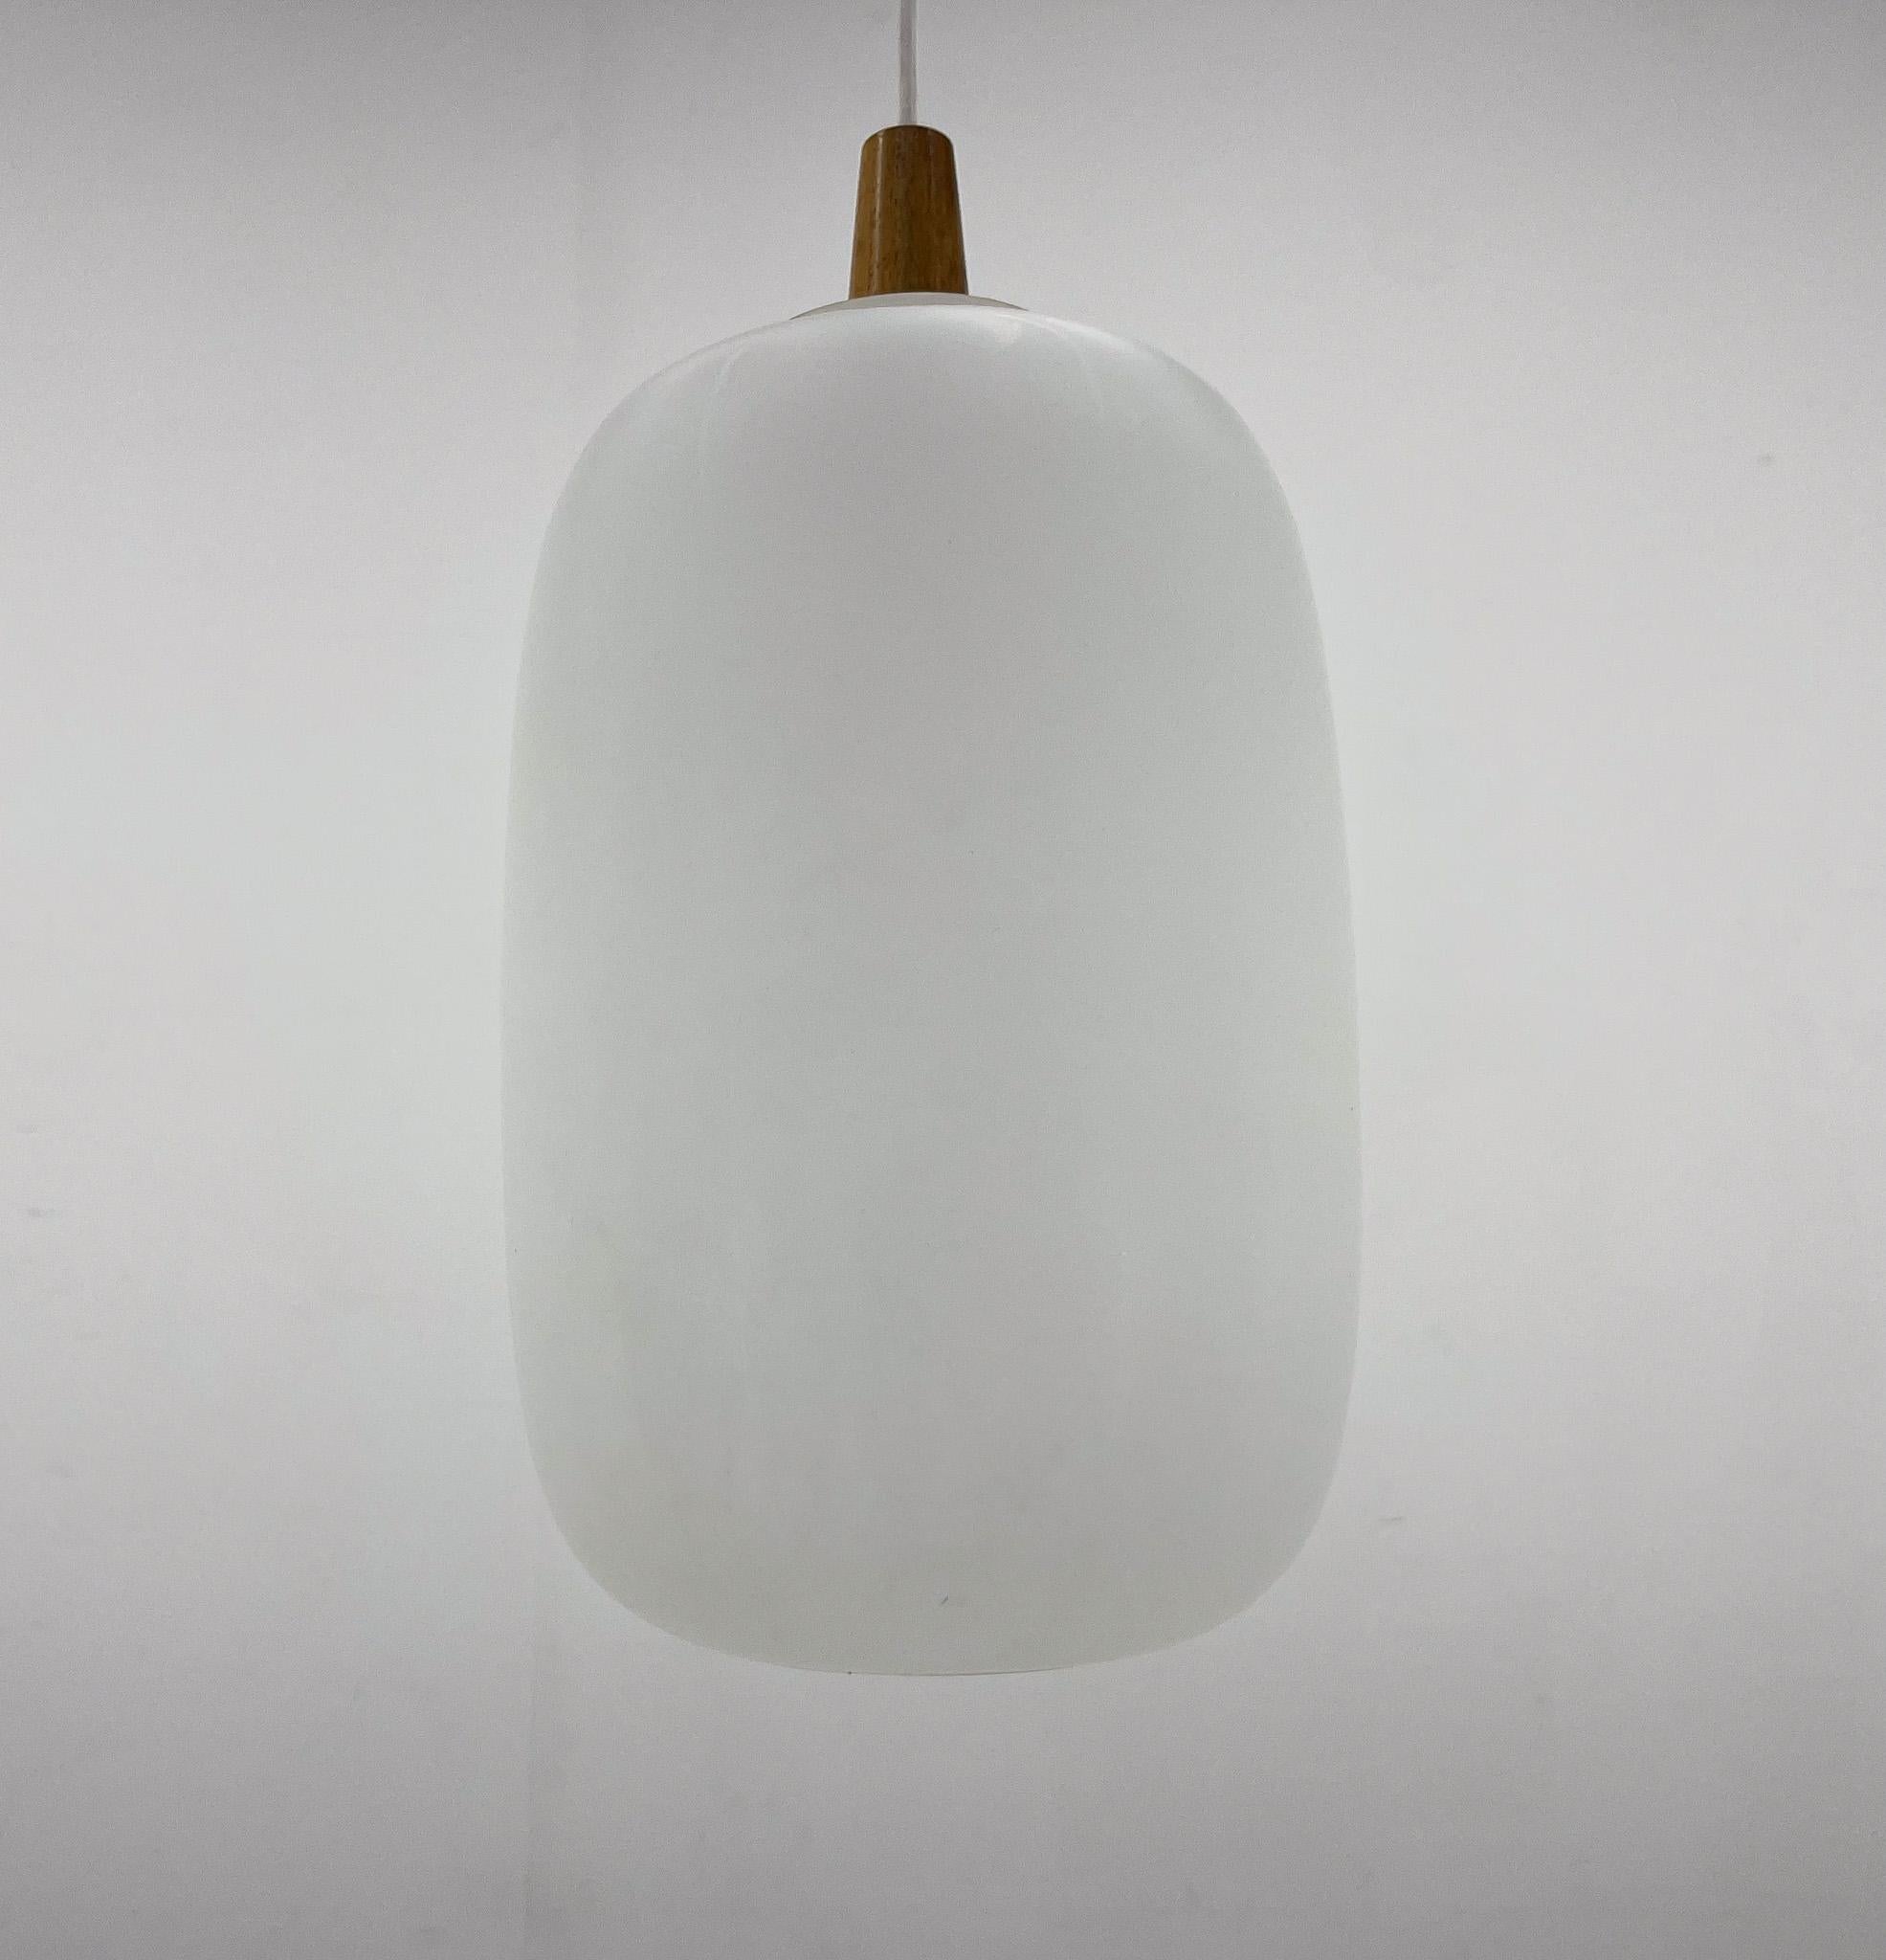 Mid-Century Modern 1960s Wood and Glass Pendant Light by ULUV, Czechoslovakia, Marked by Manufactur For Sale